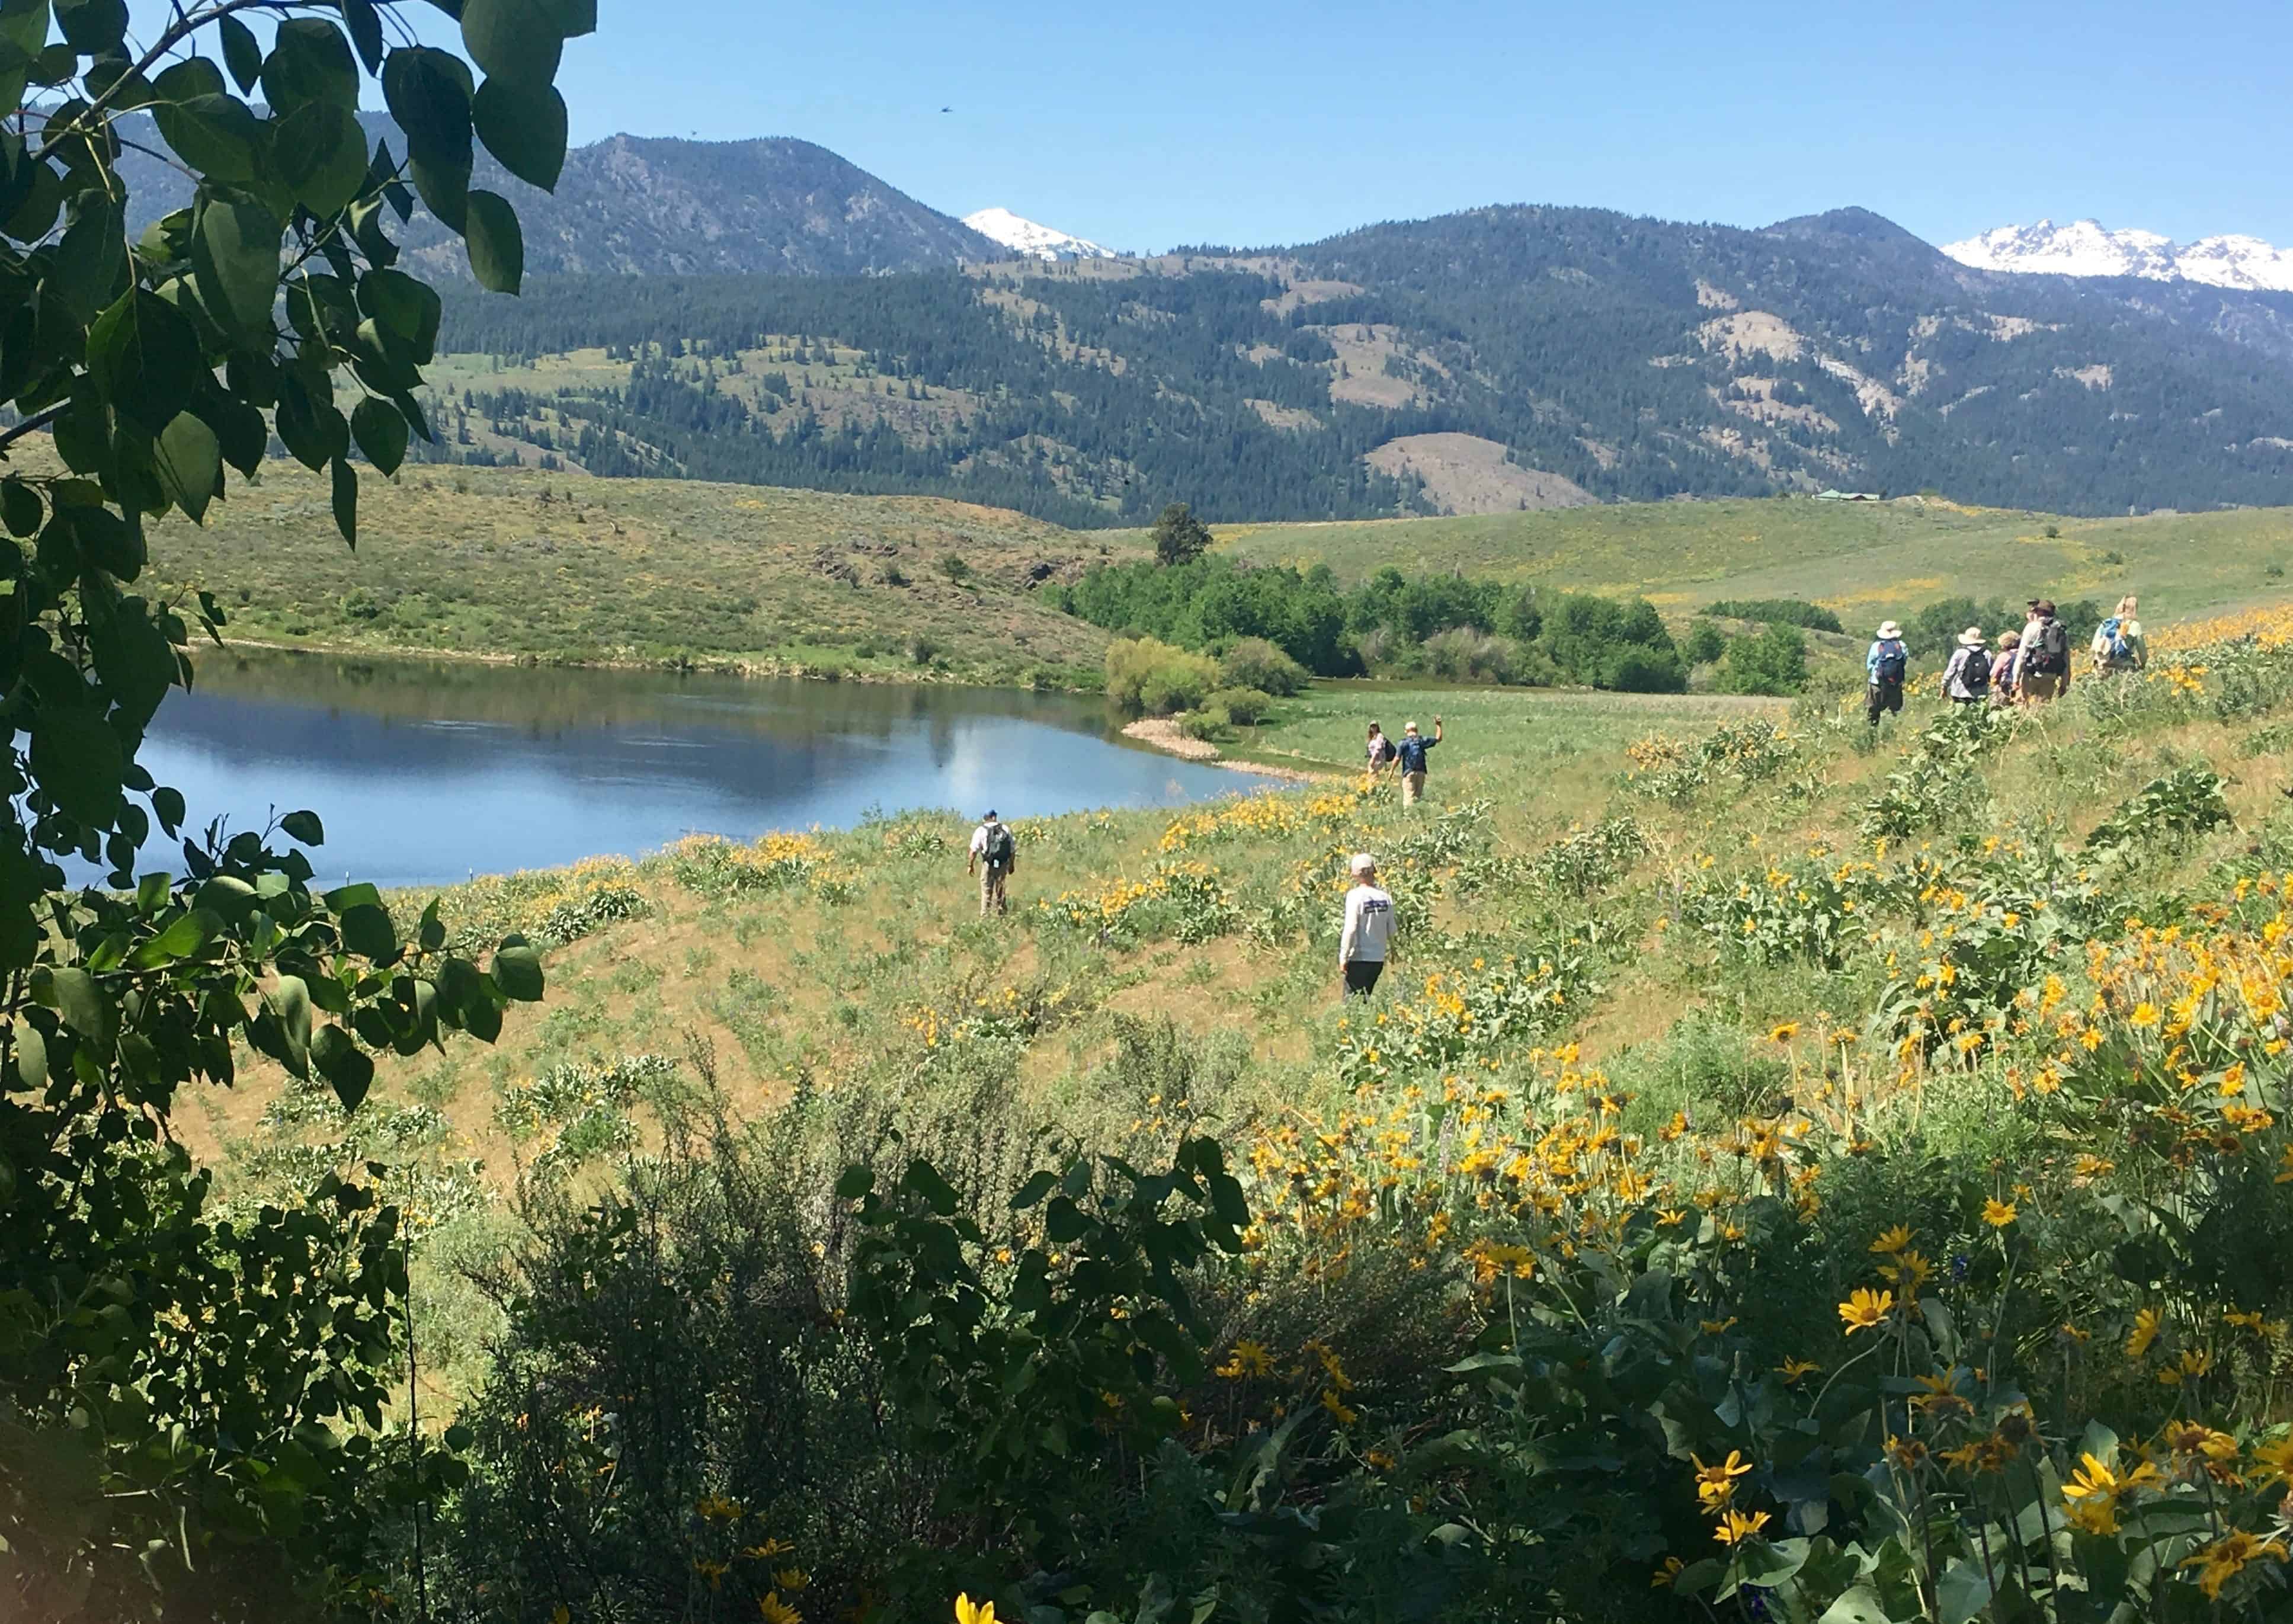 Participants wander the Methow Valley in search of snakes